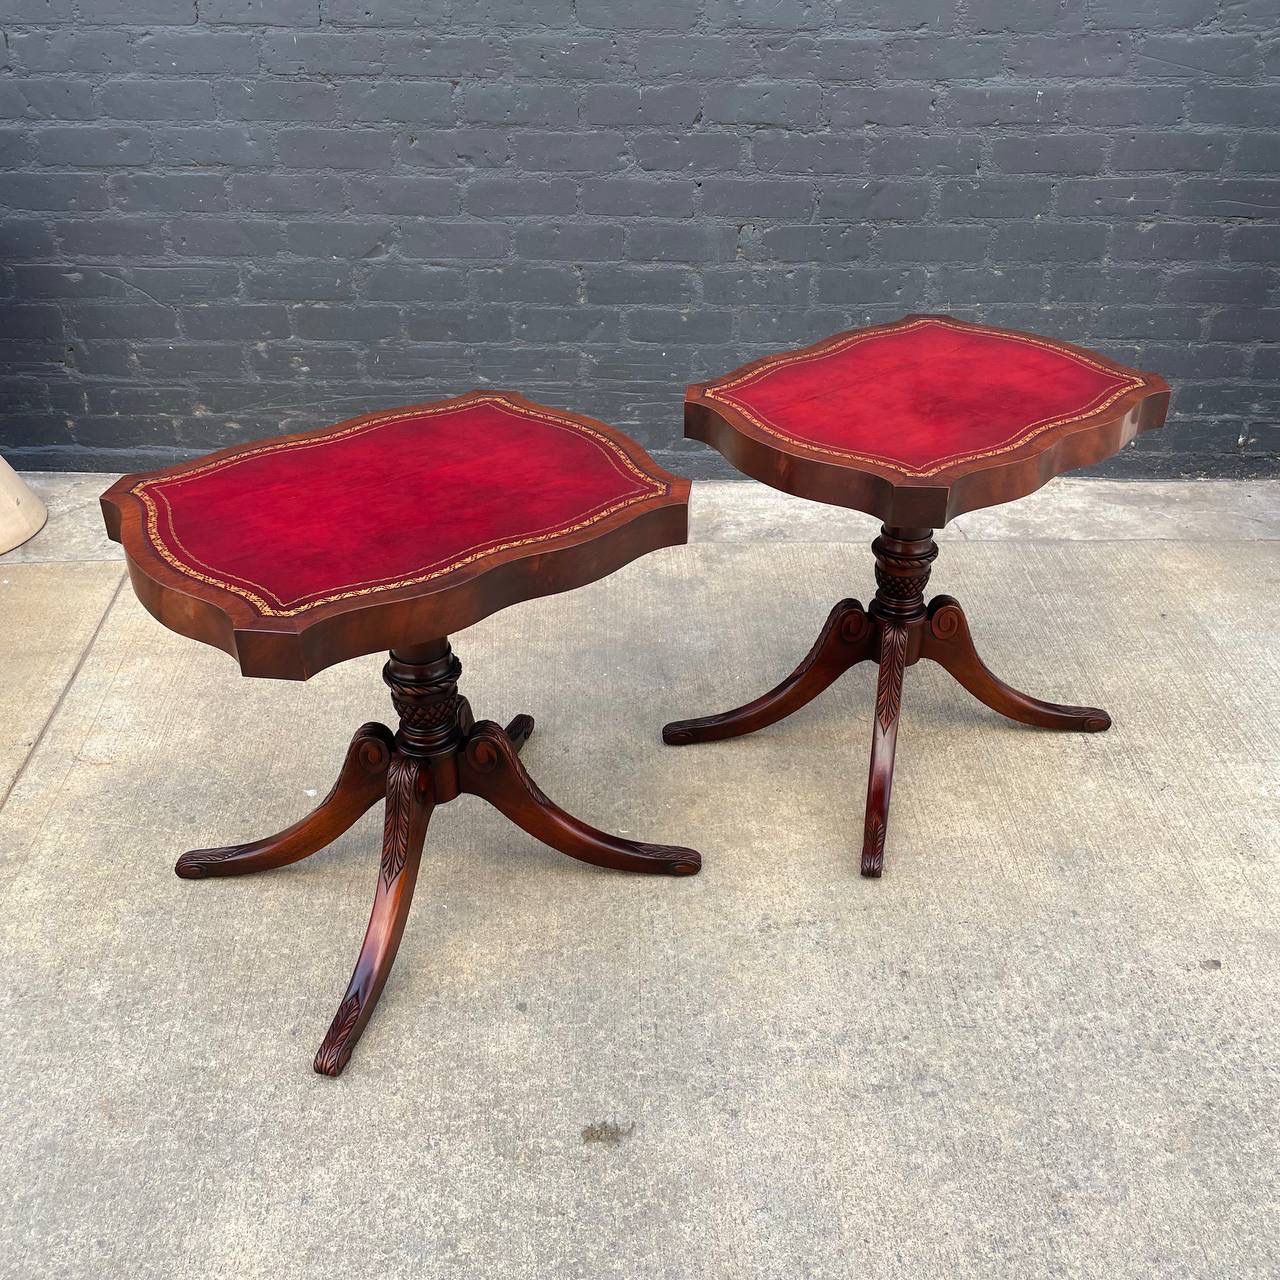 American Antique Mahogany Side Tables with Gilt-Tooled Burgundy Red Leather Top, c.1950’s